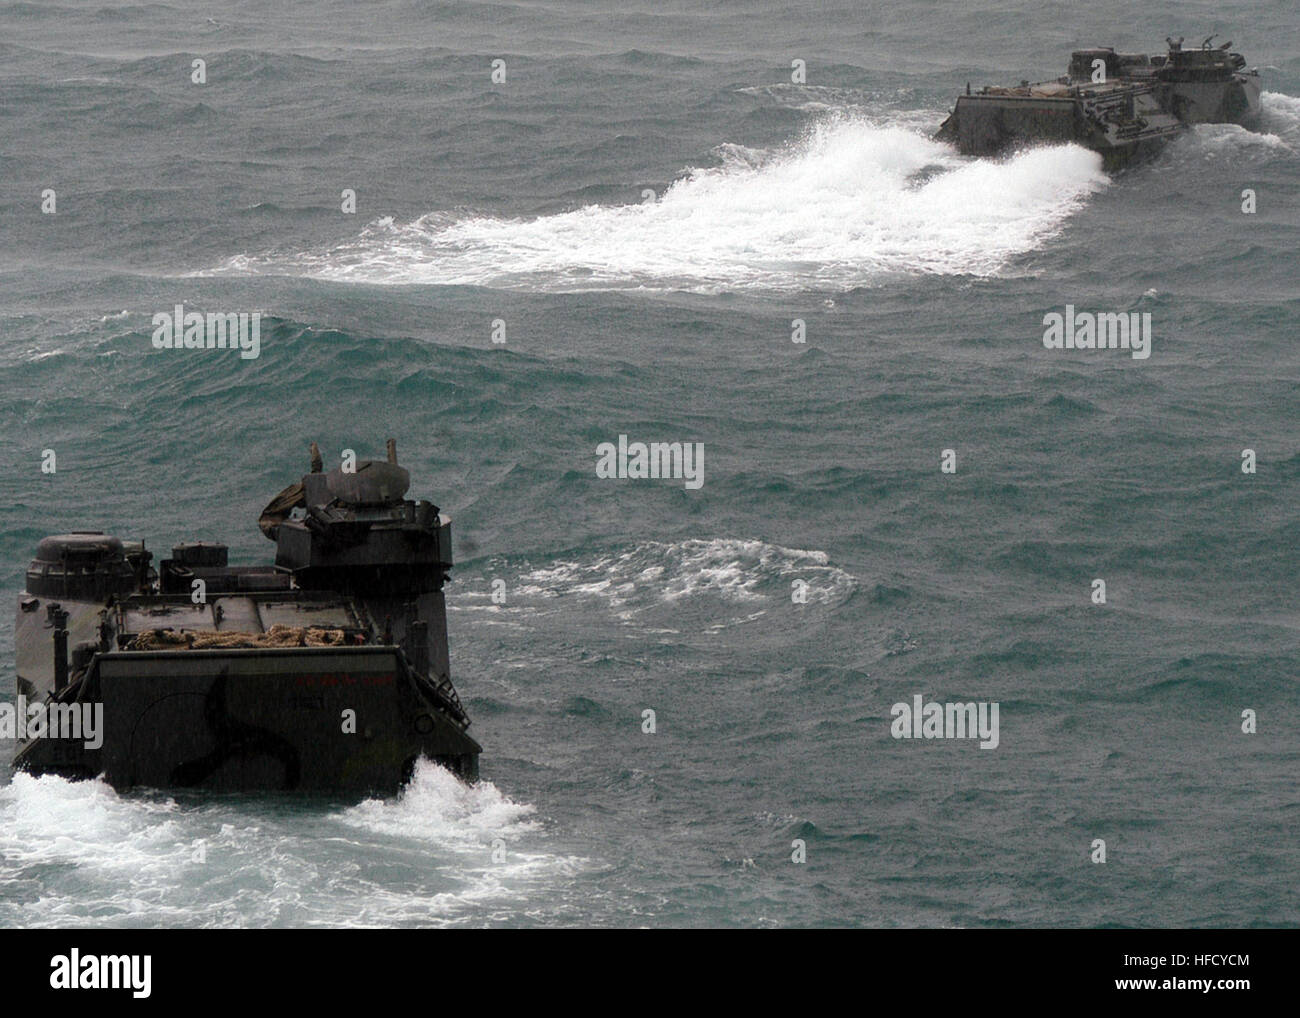 Royal Thai Navy AAV-7A1 amphibious assault vehicles, assigned to the medium landing ship HTMS Surin (LST 722), disembark from the dock landing ship USS Tortuga (LSD 46) during cooperation afloat and readiness training (CARAT) 2008, off the coast of Thailand June 15, 2008.  CARAT 2008 is an annual series of bilateral exercises involving the U.S. and Southeast Asian nations. (U.S. Navy photo by Mass Communication Specialist 2nd Class Leticia Fritzsche/Released) Royal Thai Navy AAV-7A1 AAVs disembark 080615-N-5831F-190 Stock Photo